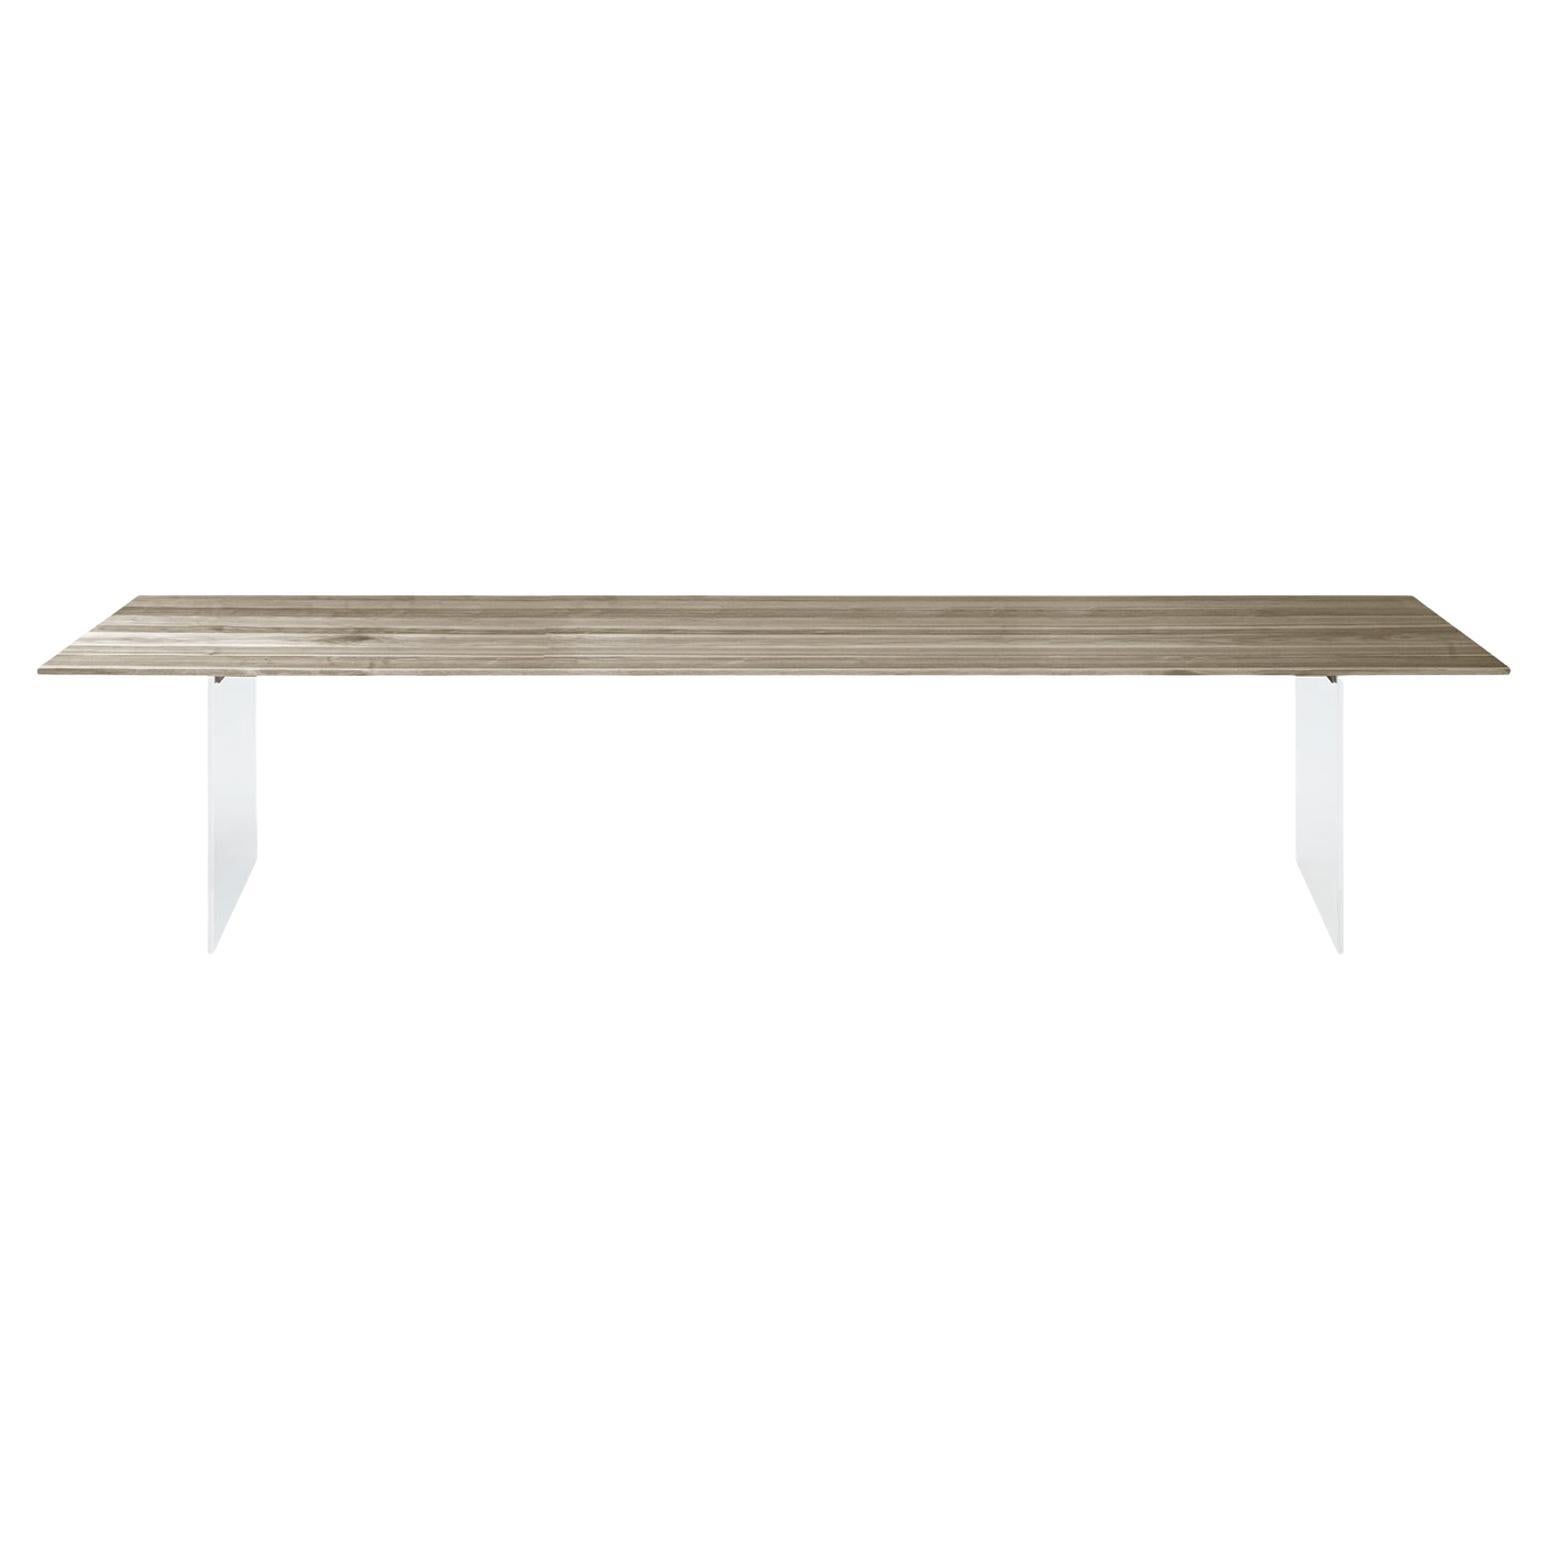 Sospeso Solid Wood Table, Walnut in Hand-Made Natural Grey Finish, Contemporary